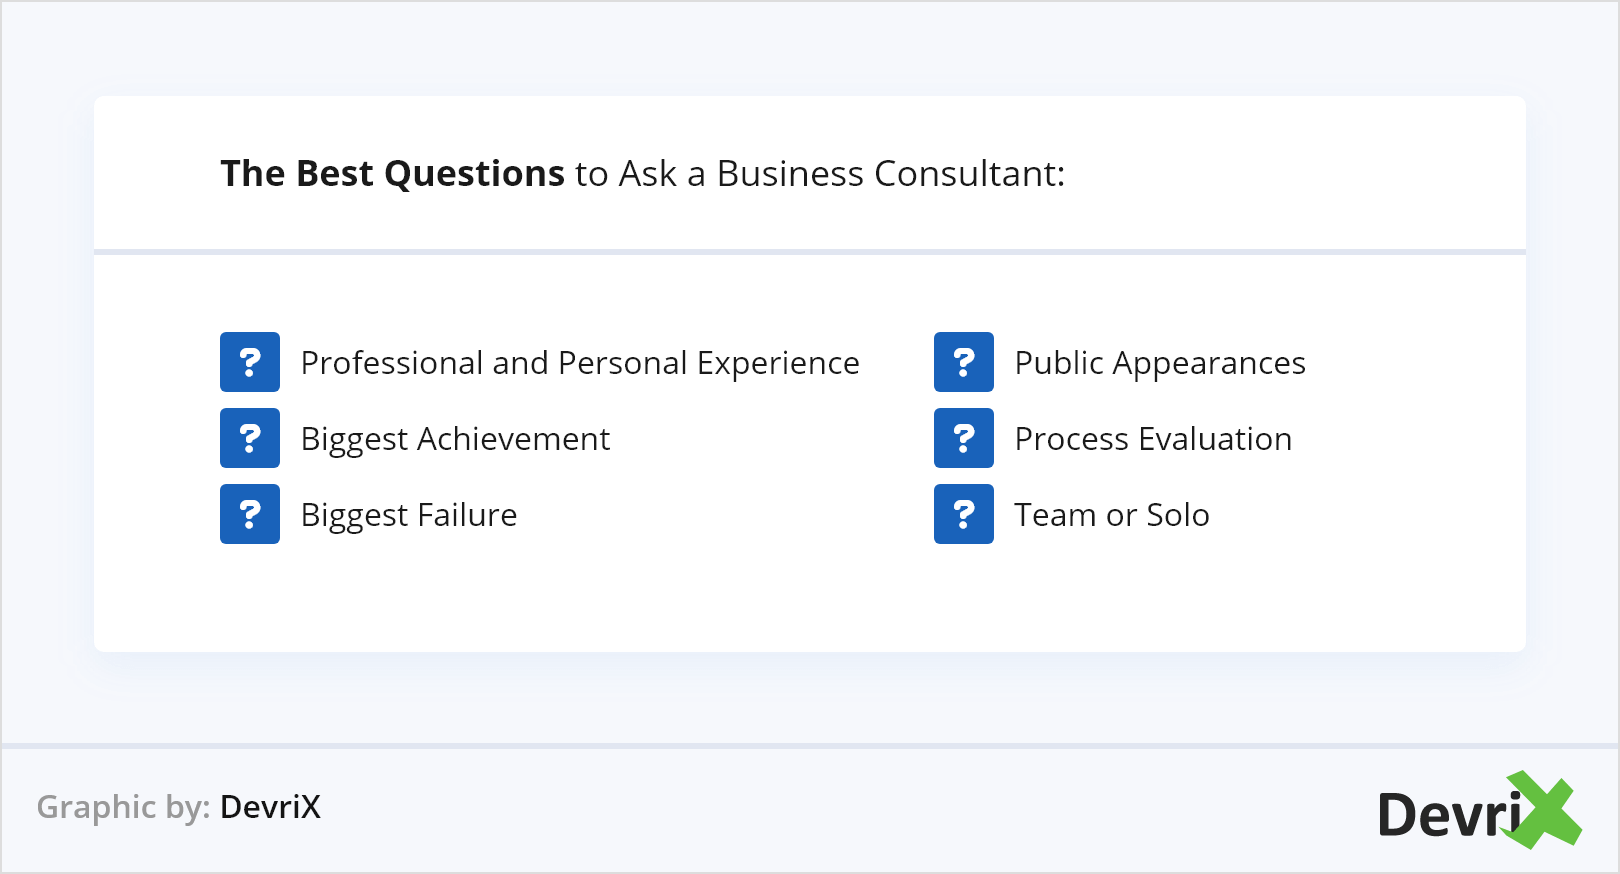 The Best Questions to Ask a Business Consultant